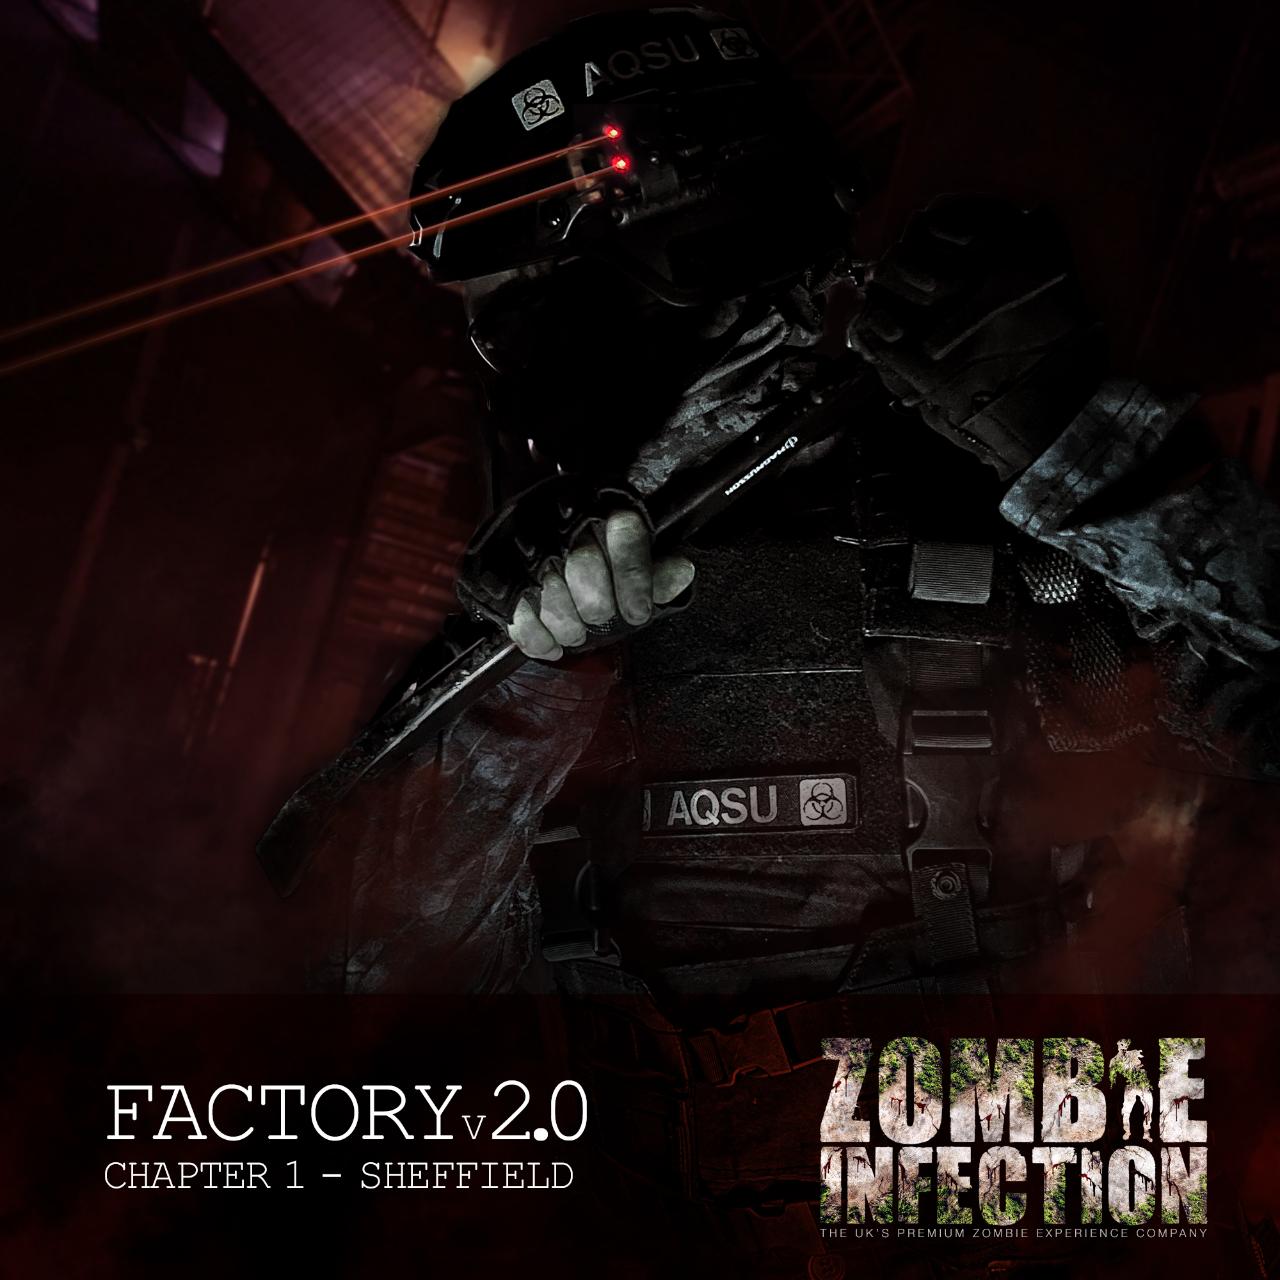 Chapter 1  |  "The Factory 2.0" - Sheffield Age 18+